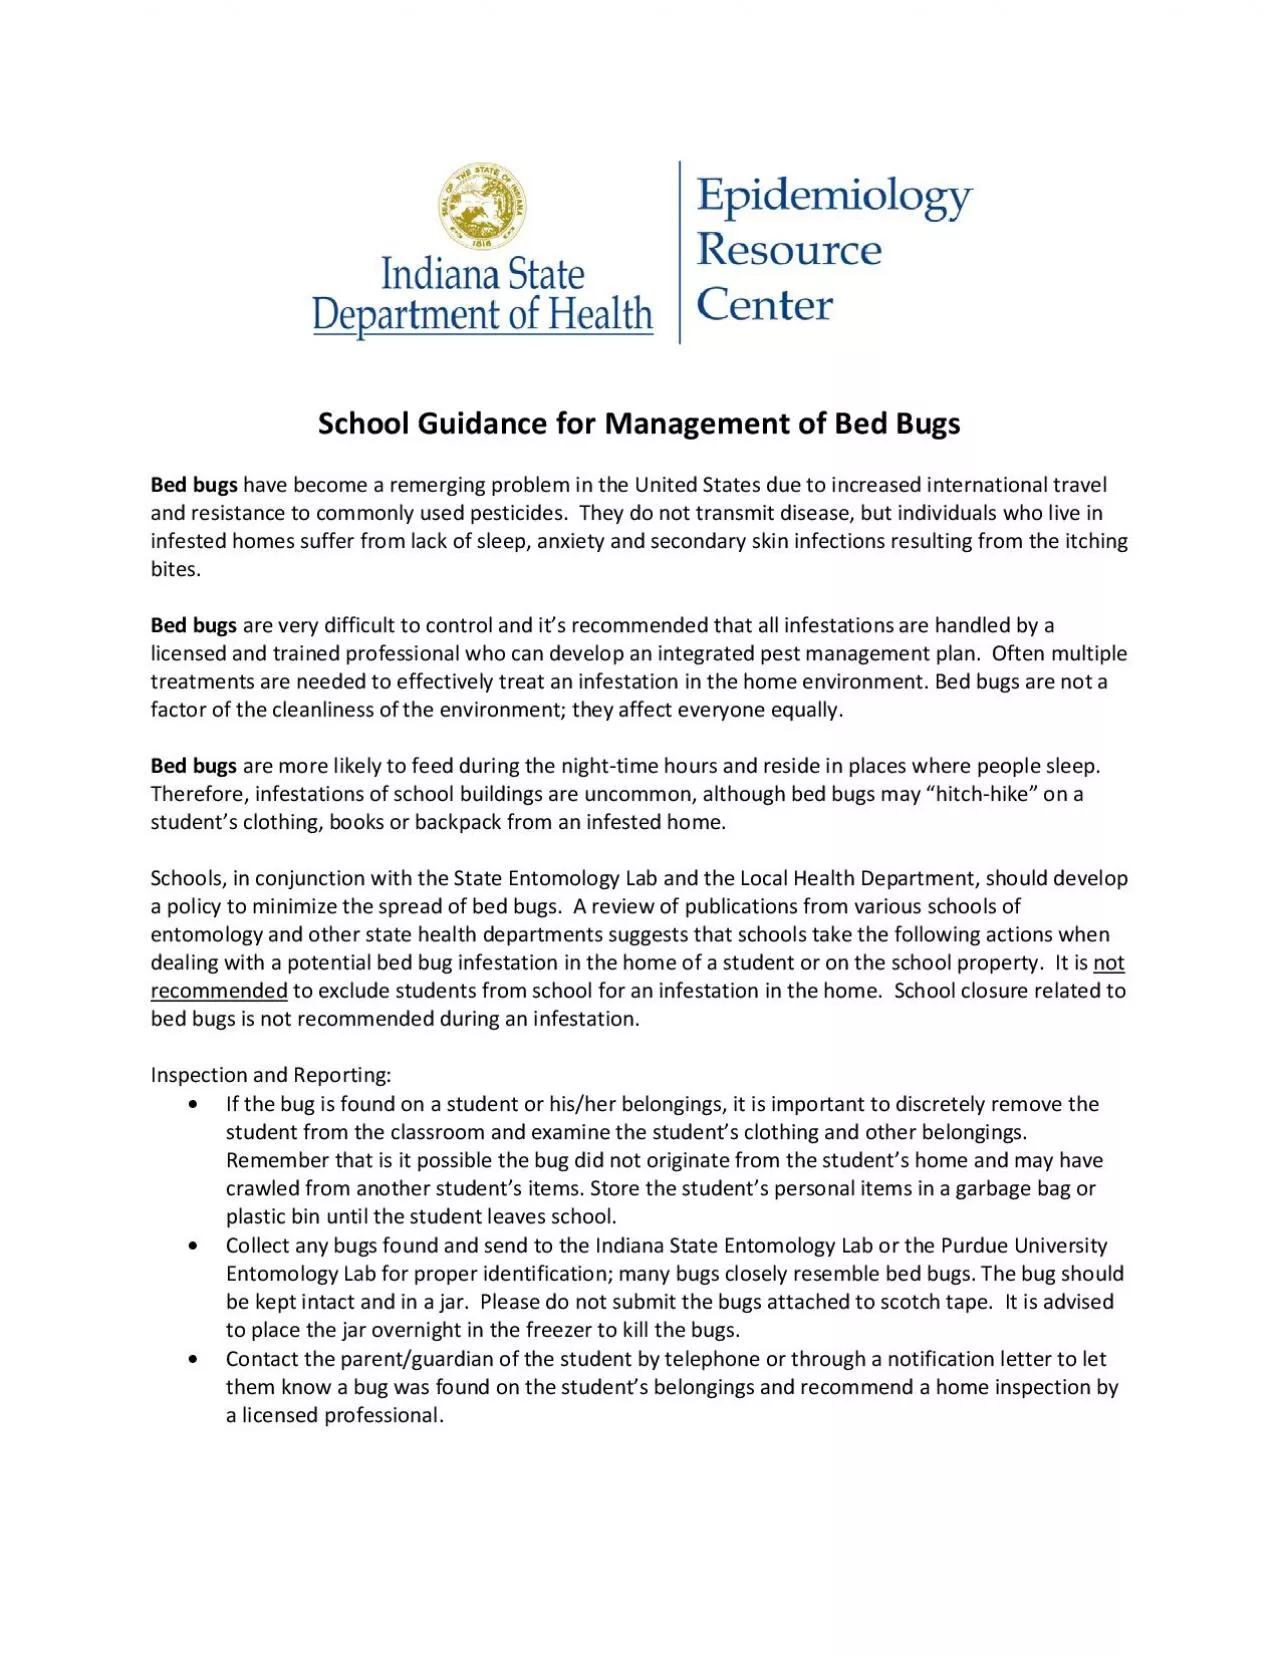 School Guidance for Management of Bed BugsBed bugshave become a remerg